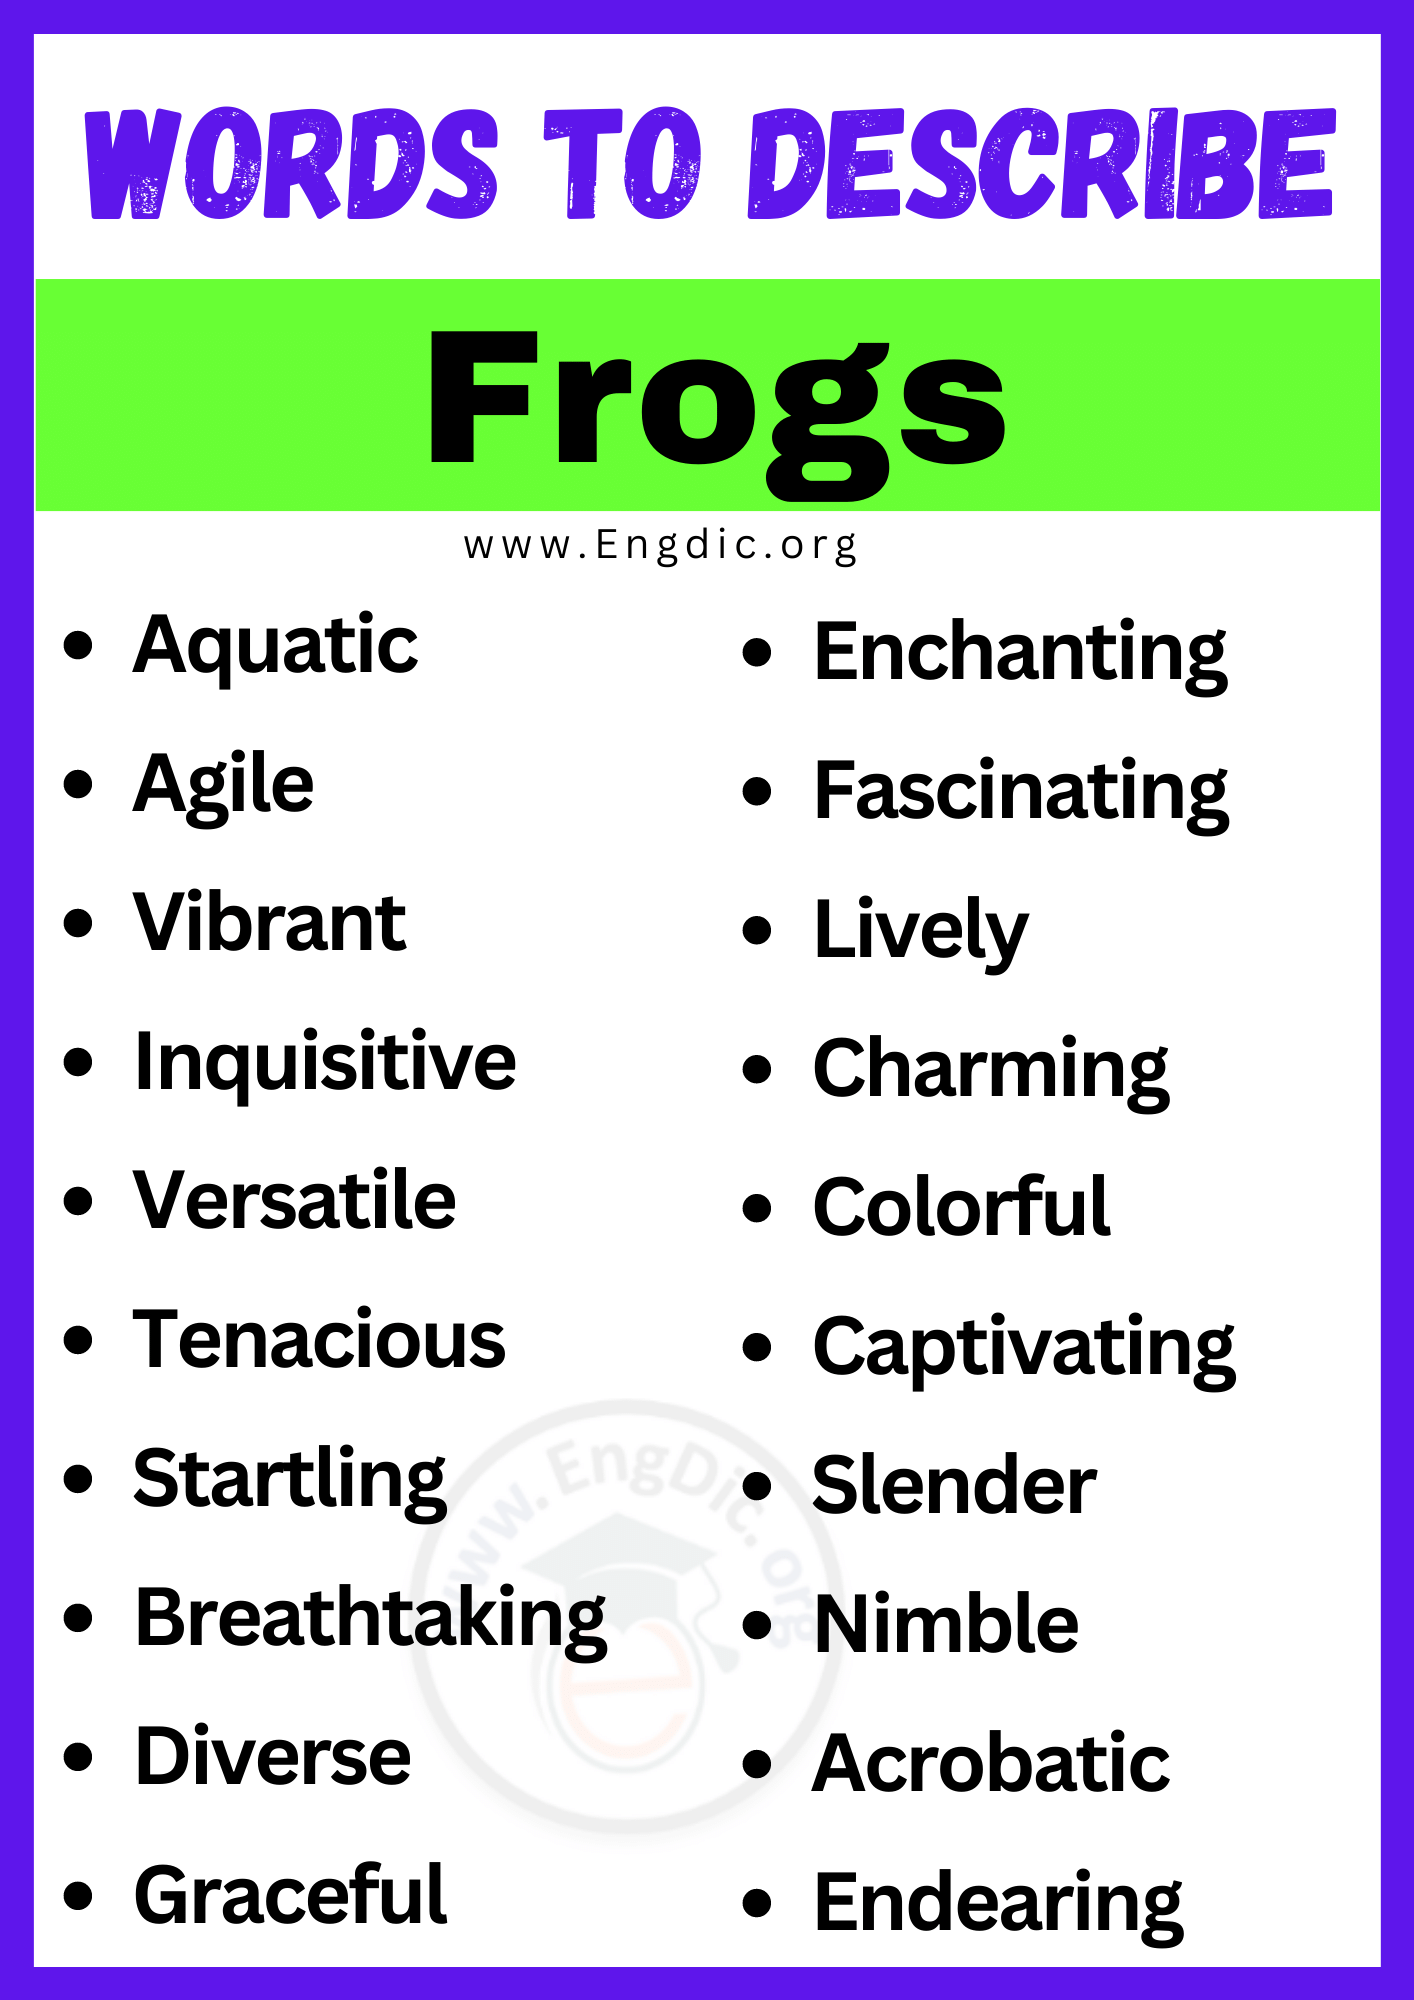 Words to Describe Frogs